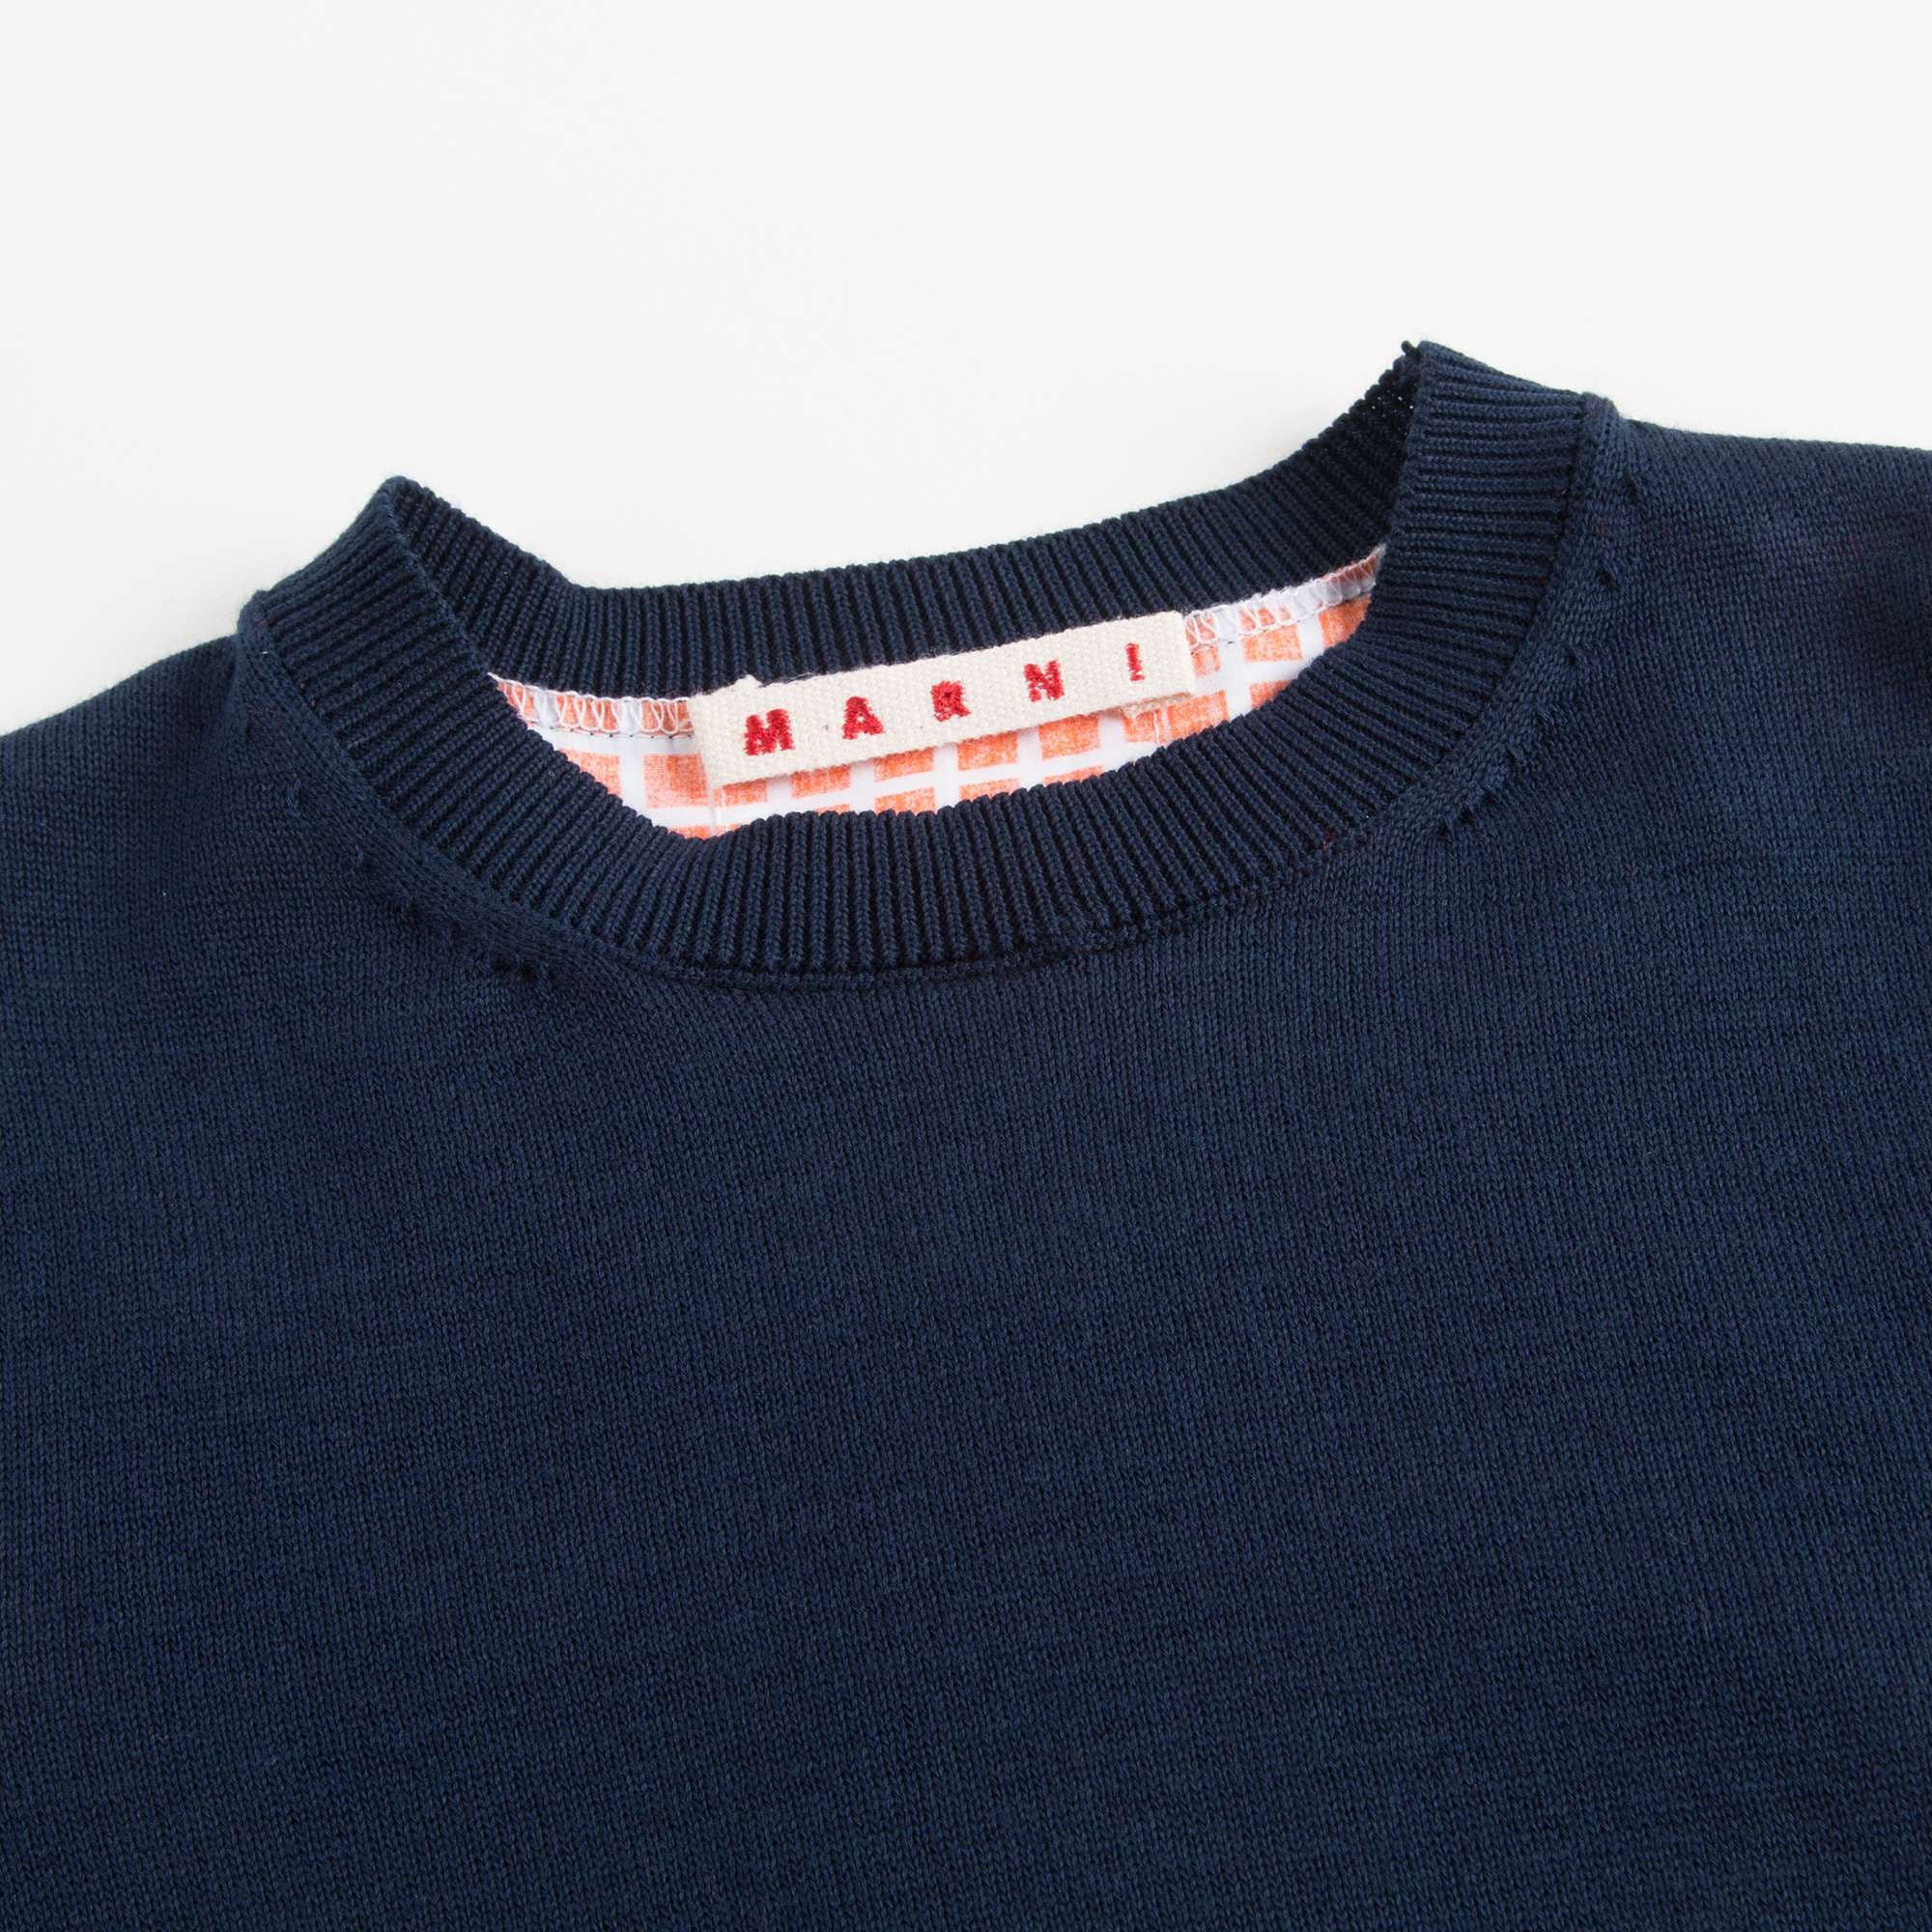 Girls Navy Blue & Red Check Sweater